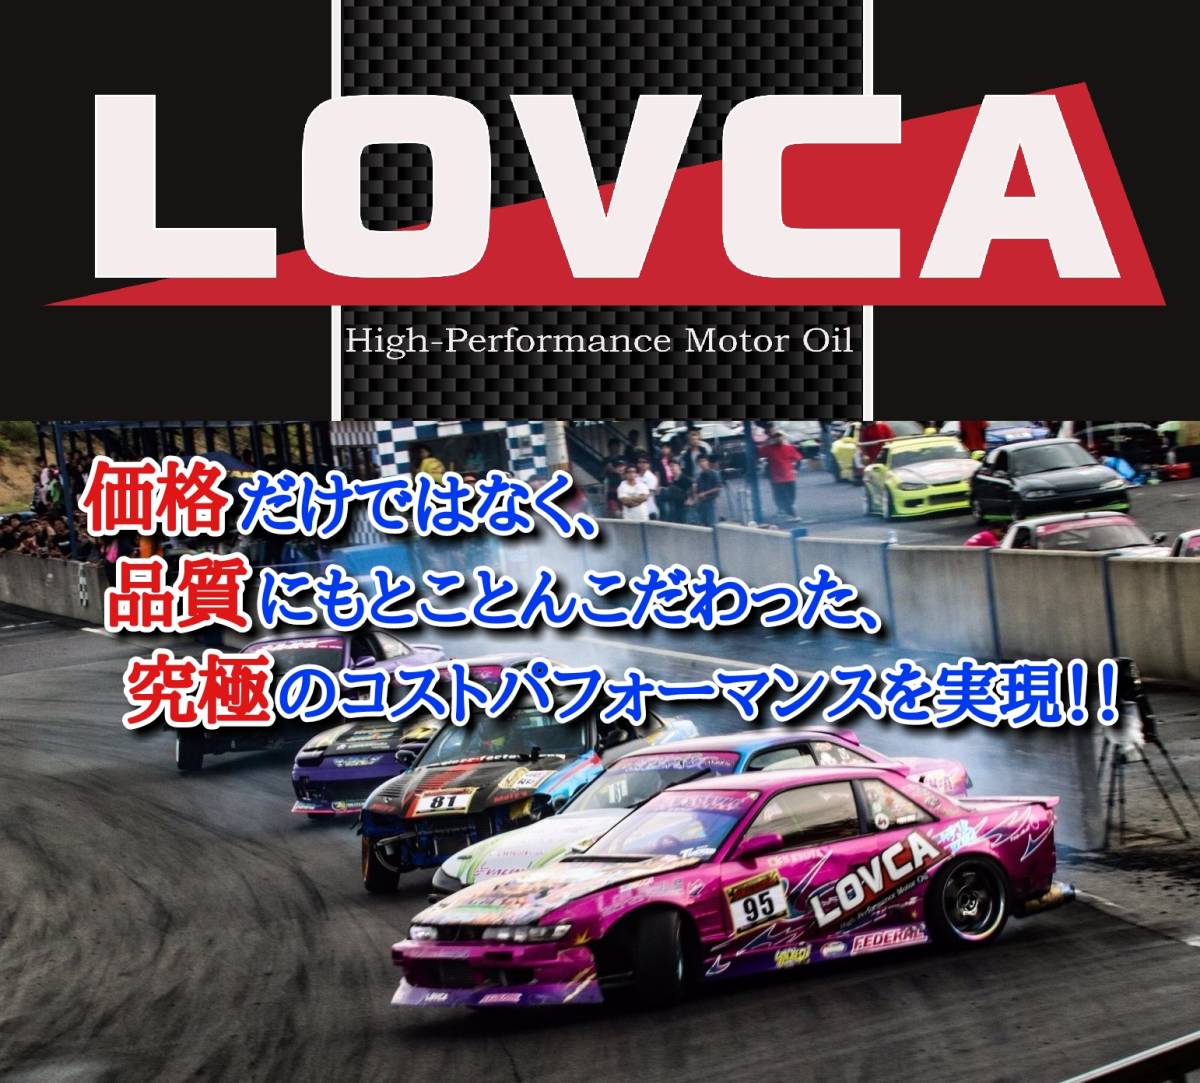 # free shipping #LOVCA HIGH-STANDARD 10W-30 4L# large liking . love car therefore . select person . is increasing #100% all compound #10w30 Rav ka oil made in Japan #LHS1030-4